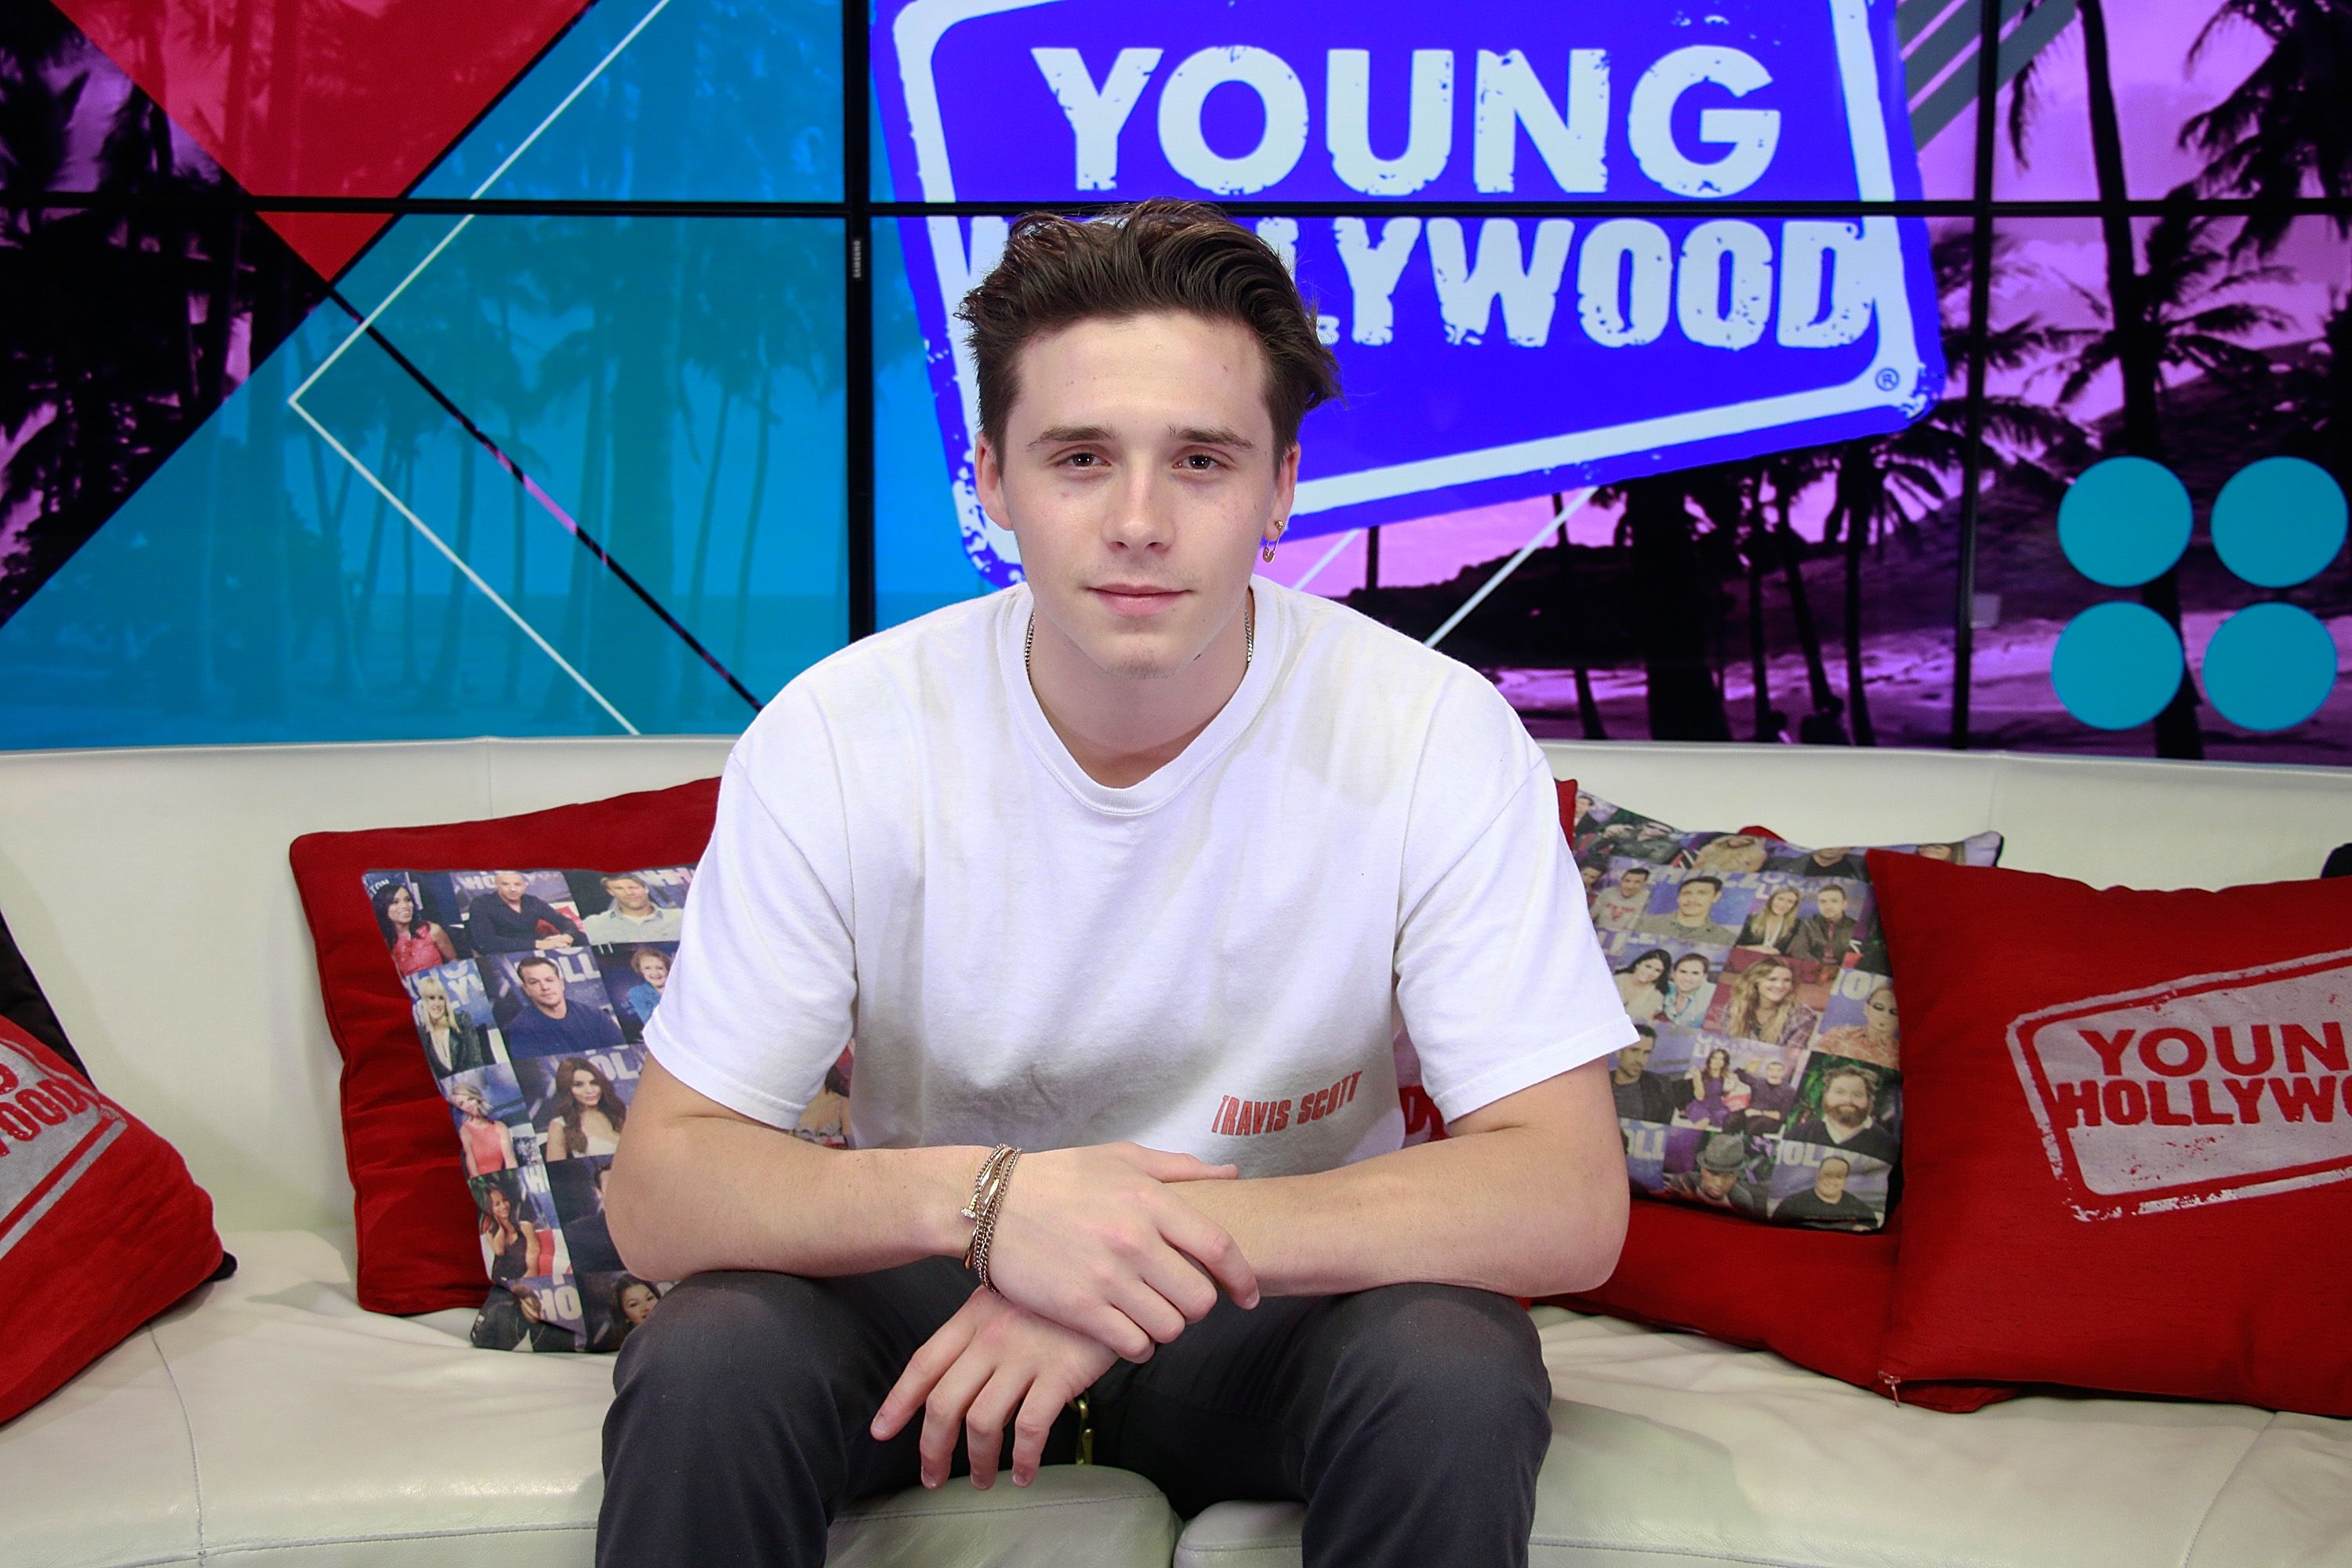 Brooklyn Beckham visits the Young Hollywood Studio on August 2, 2017 in Los Angeles, California. | Source: Getty Images